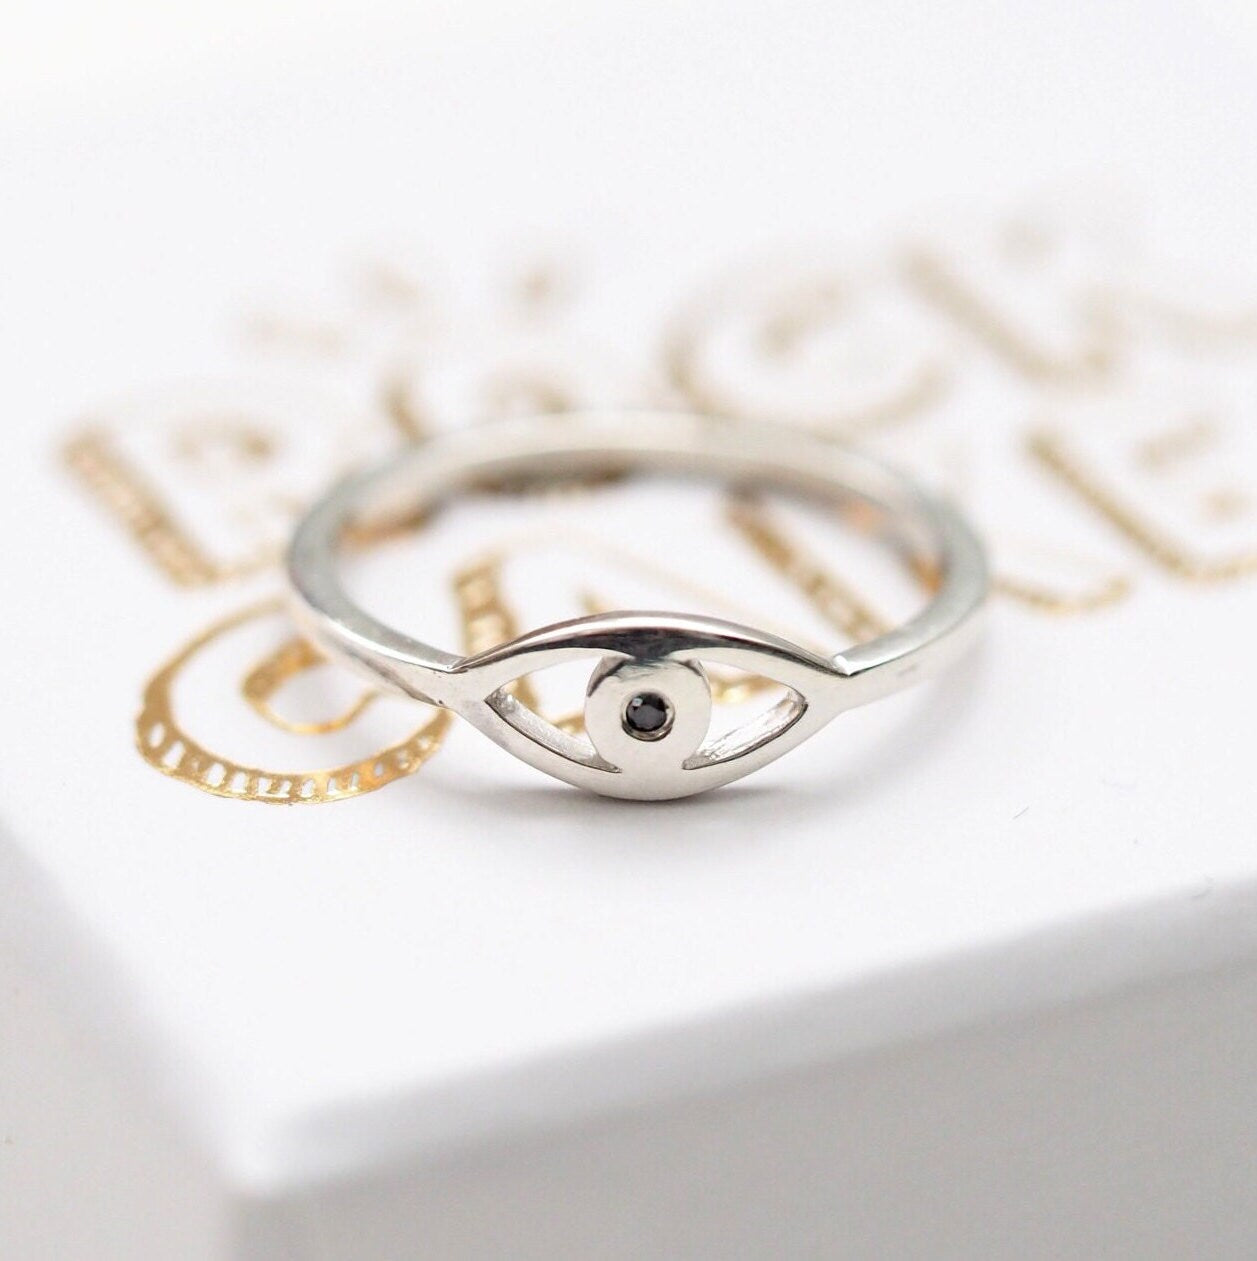 Eye Ring - Silver or Gold and Diamond